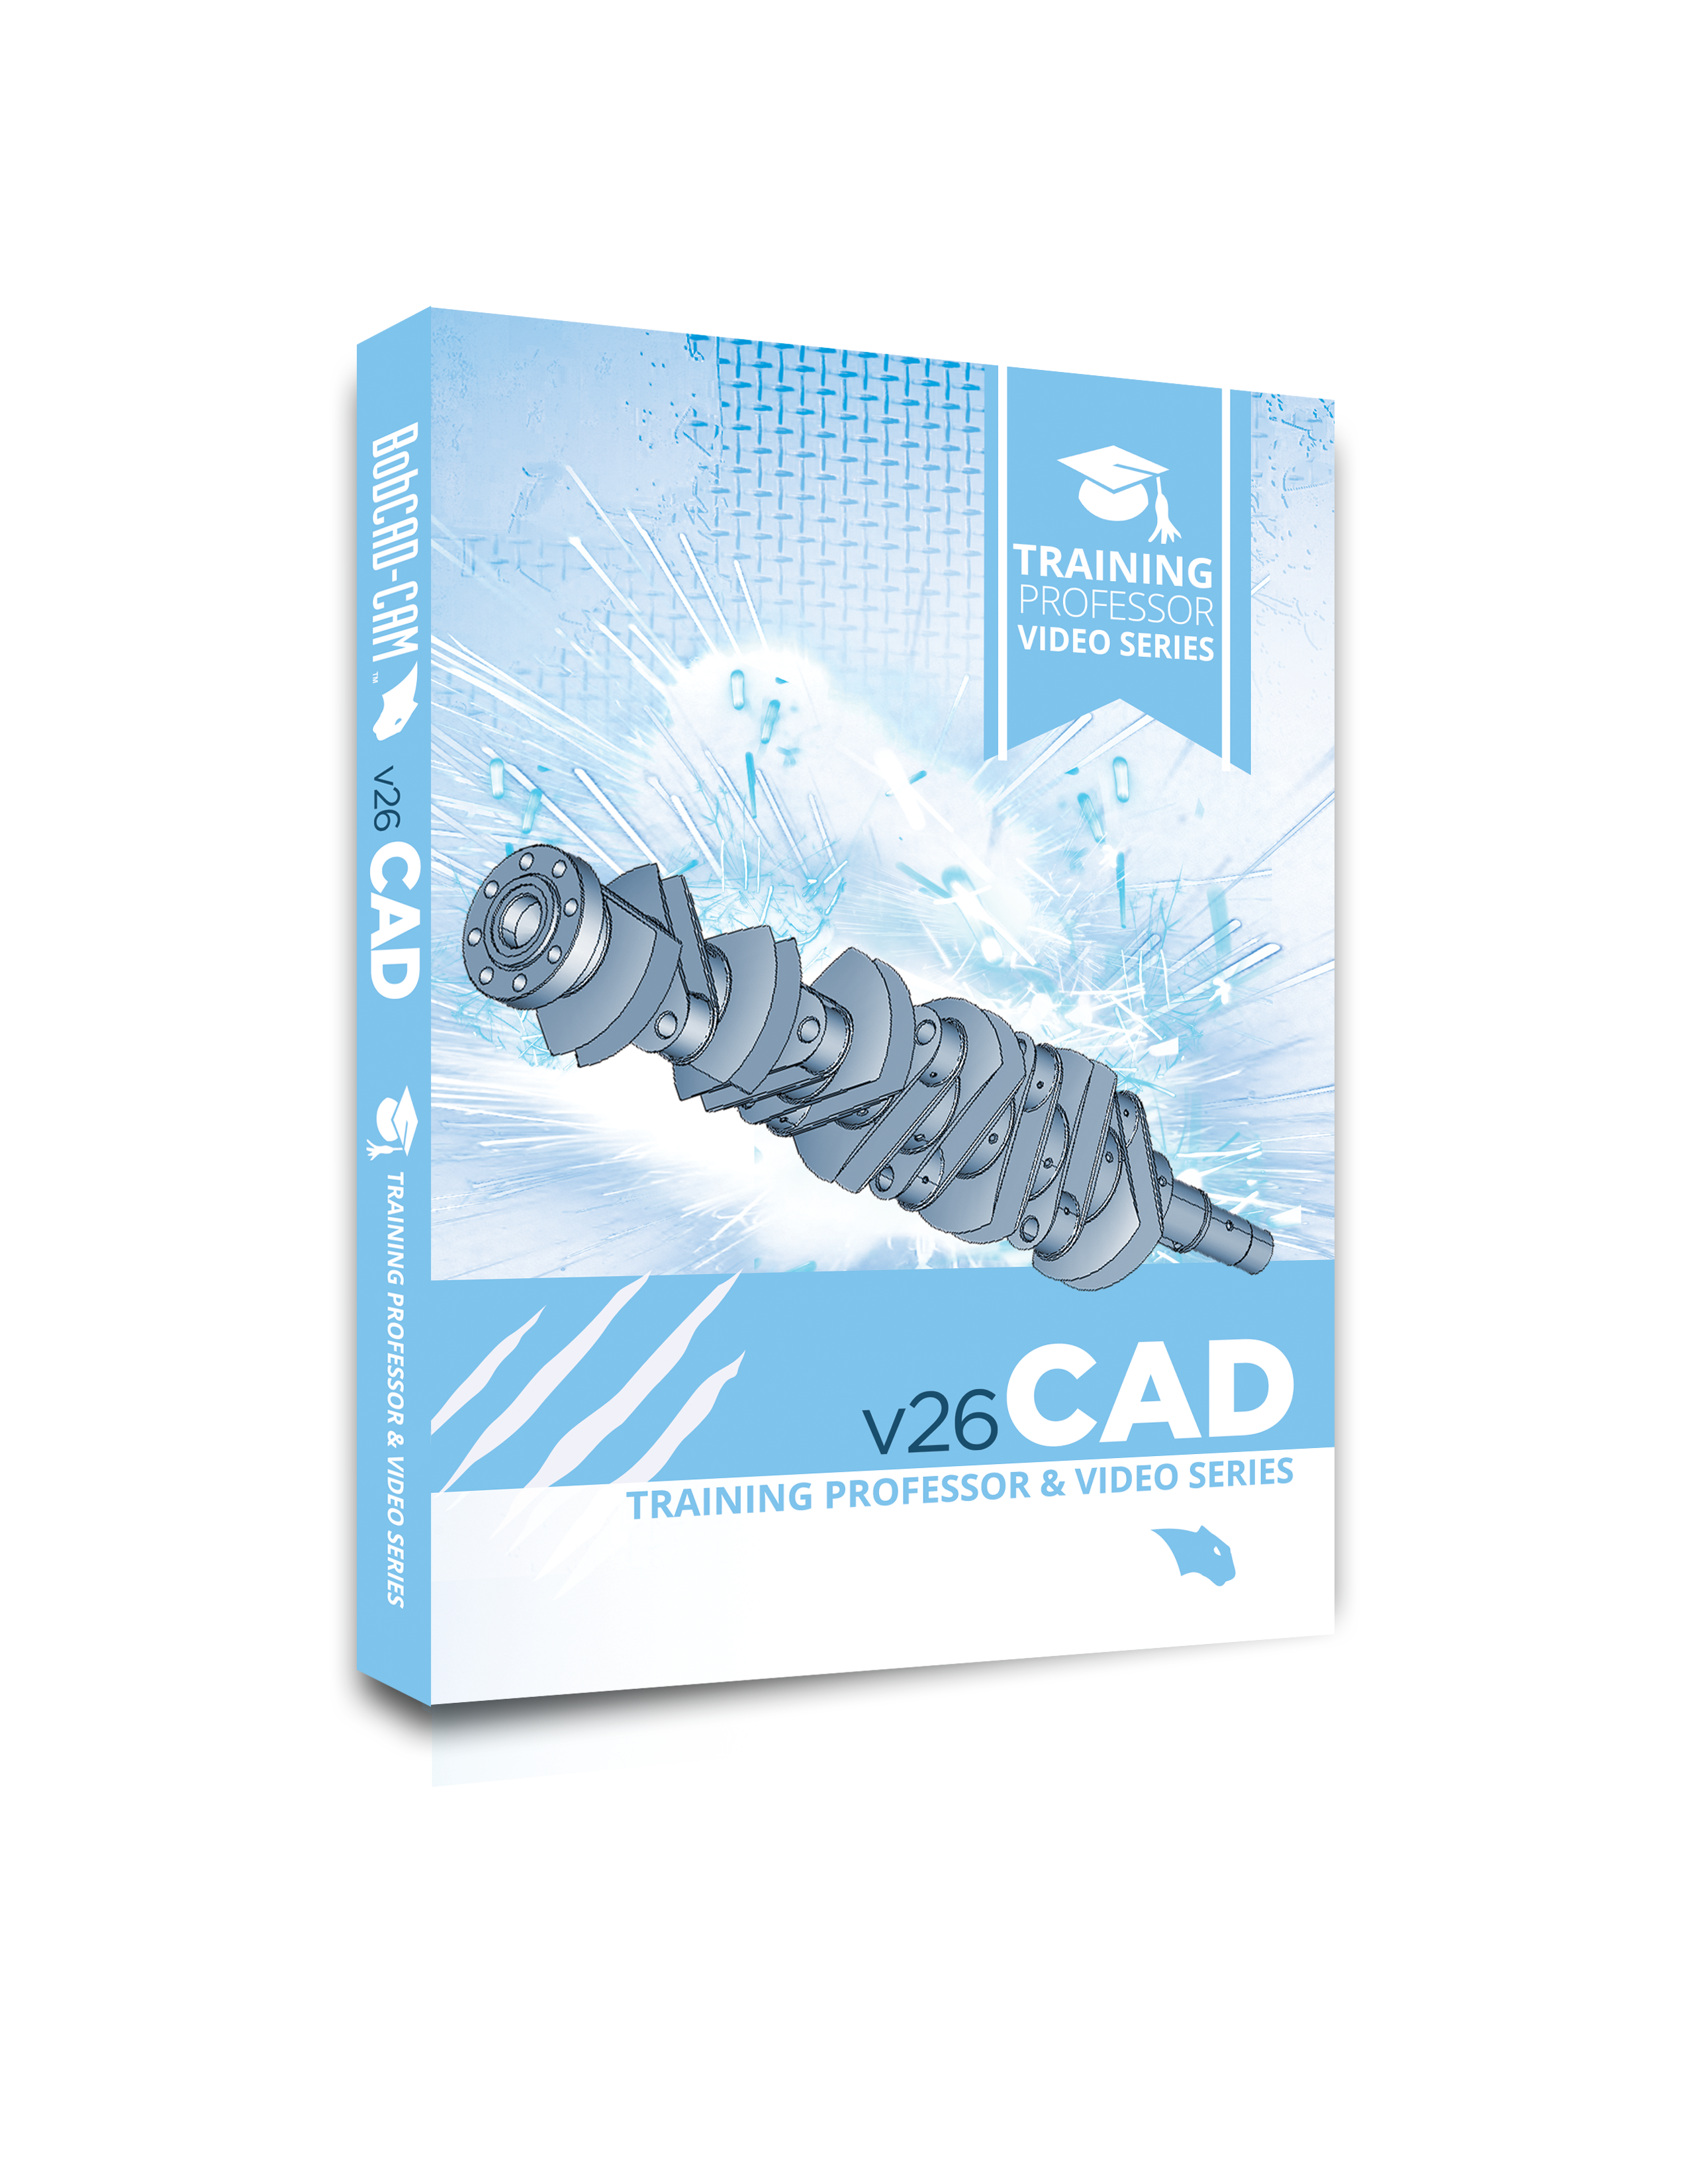 New CAD Design Software Training Release